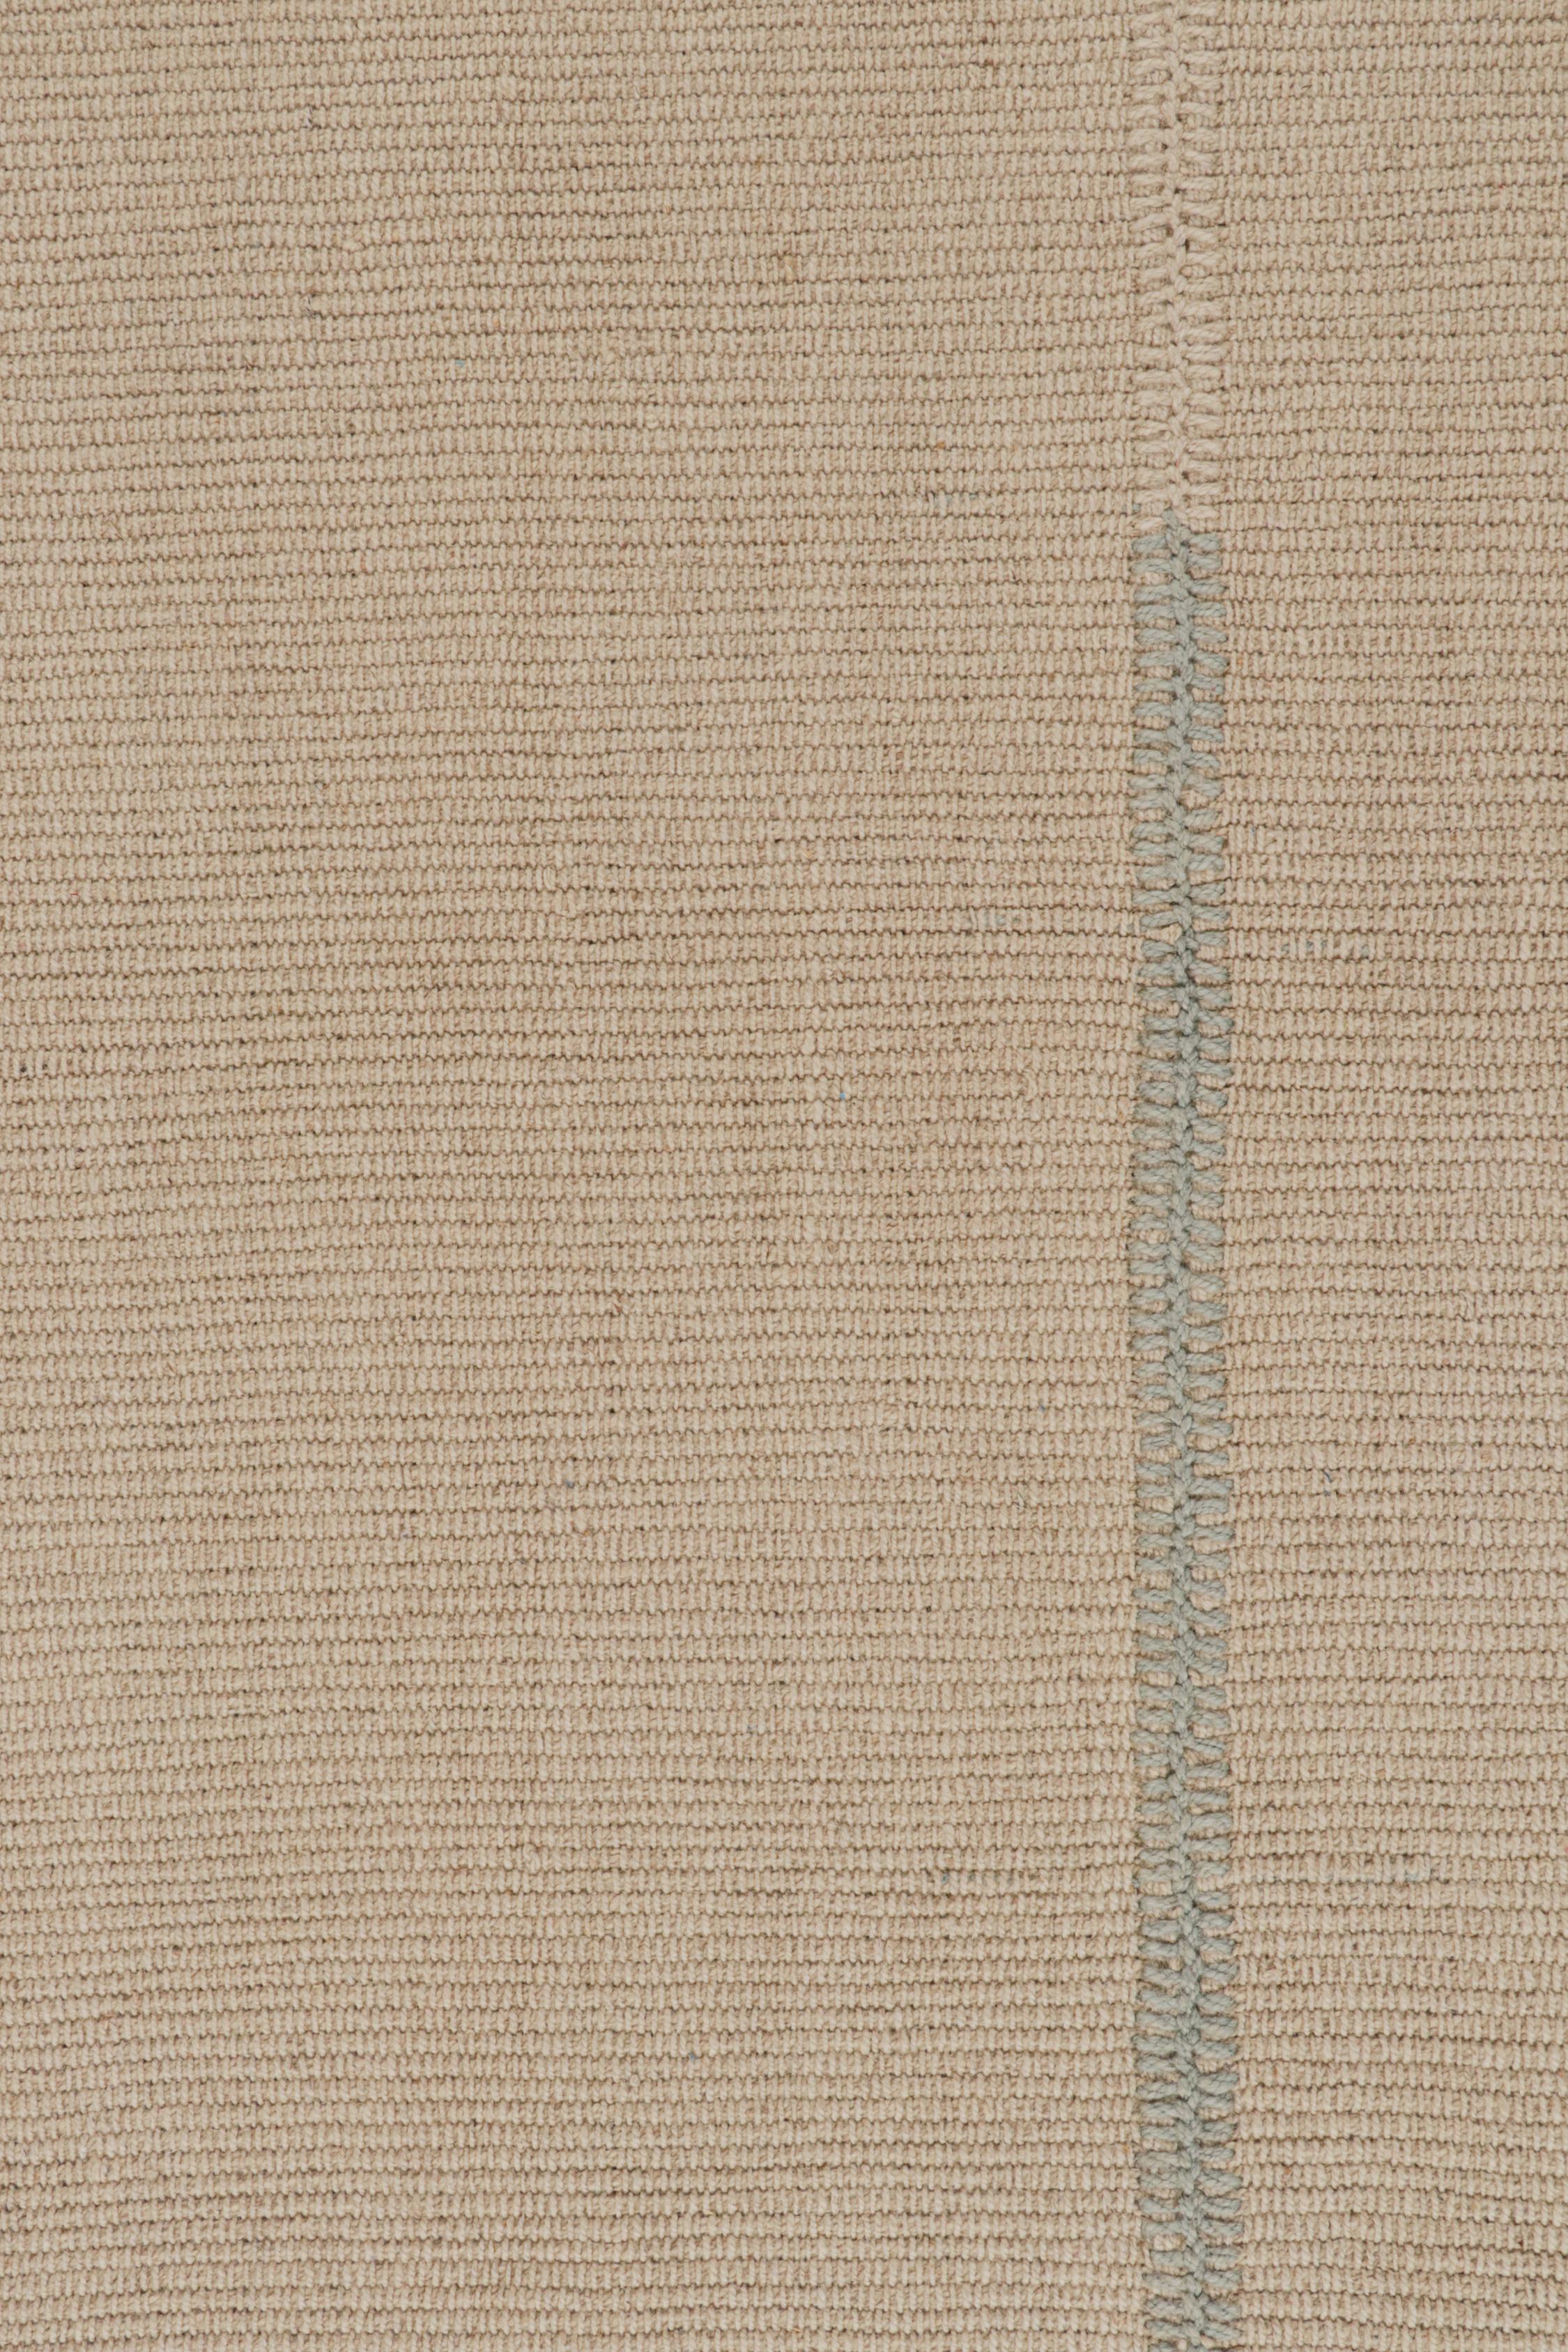 Rug & Kilim’s Contemporary Kilim in Beige, Blue Stripes and Off-White Accents In New Condition For Sale In Long Island City, NY